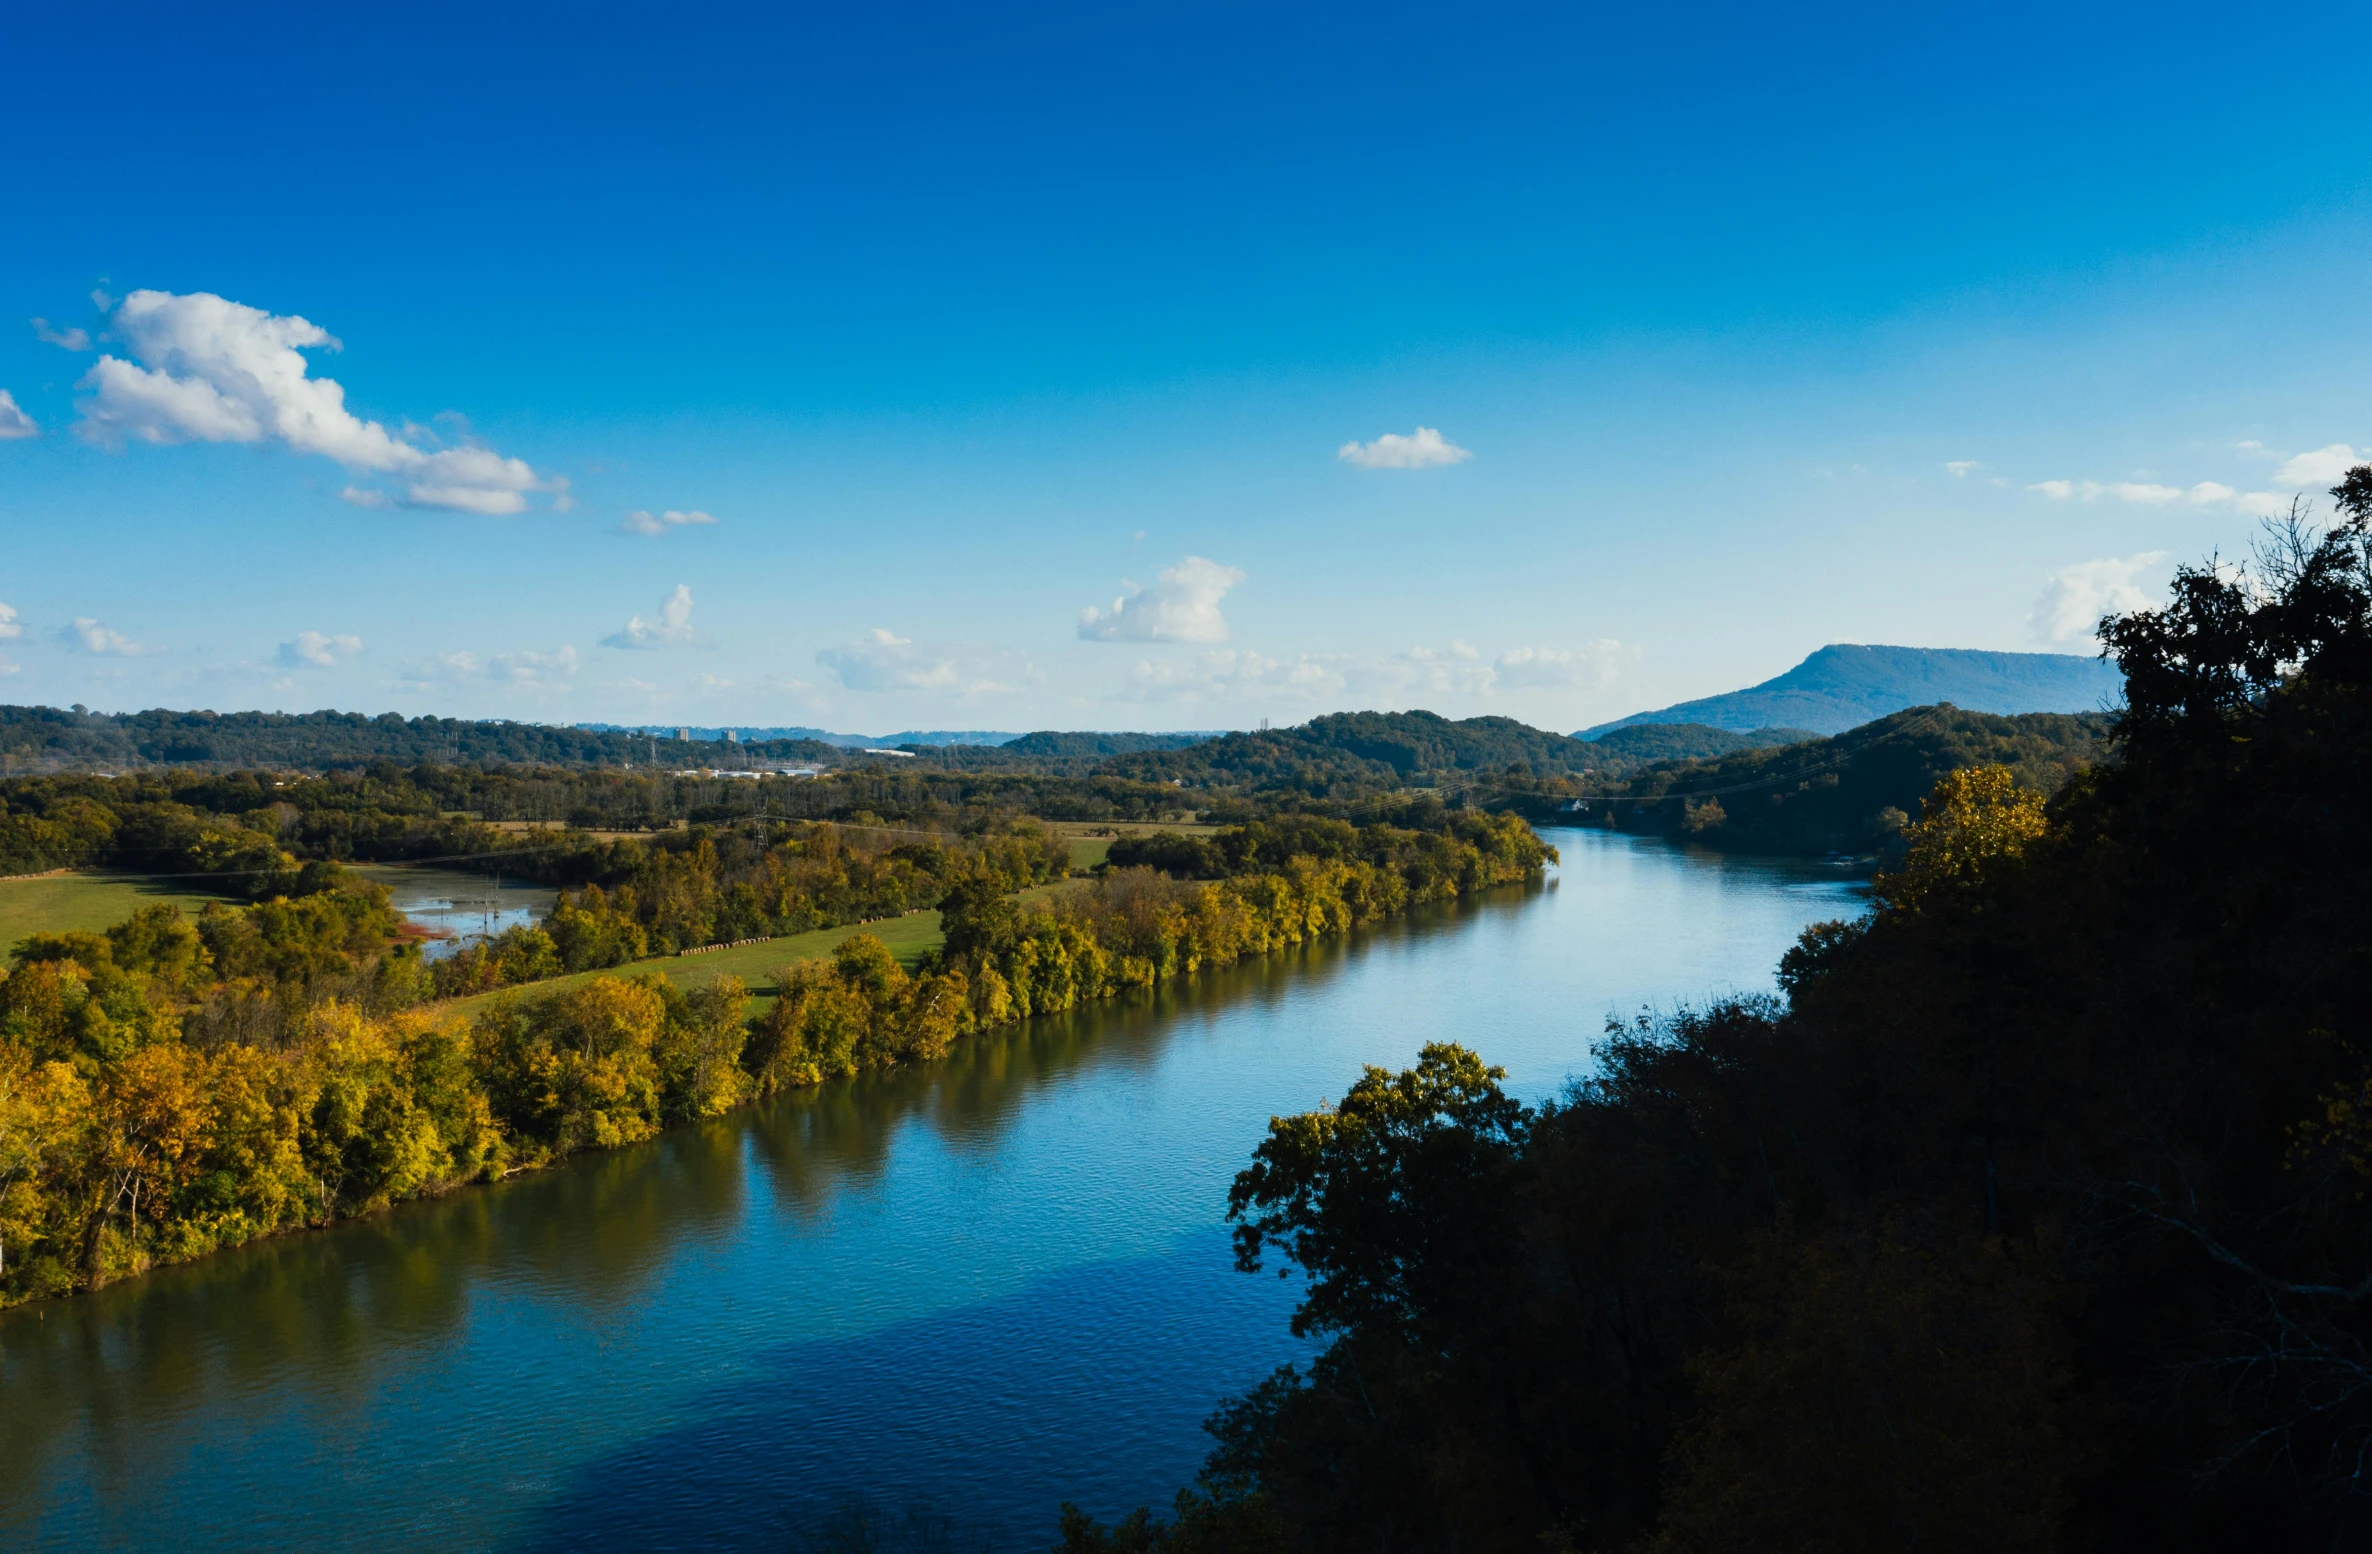 a large body of water surrounded by trees, tn, mountains and rivers, fan favorite, wide angle river